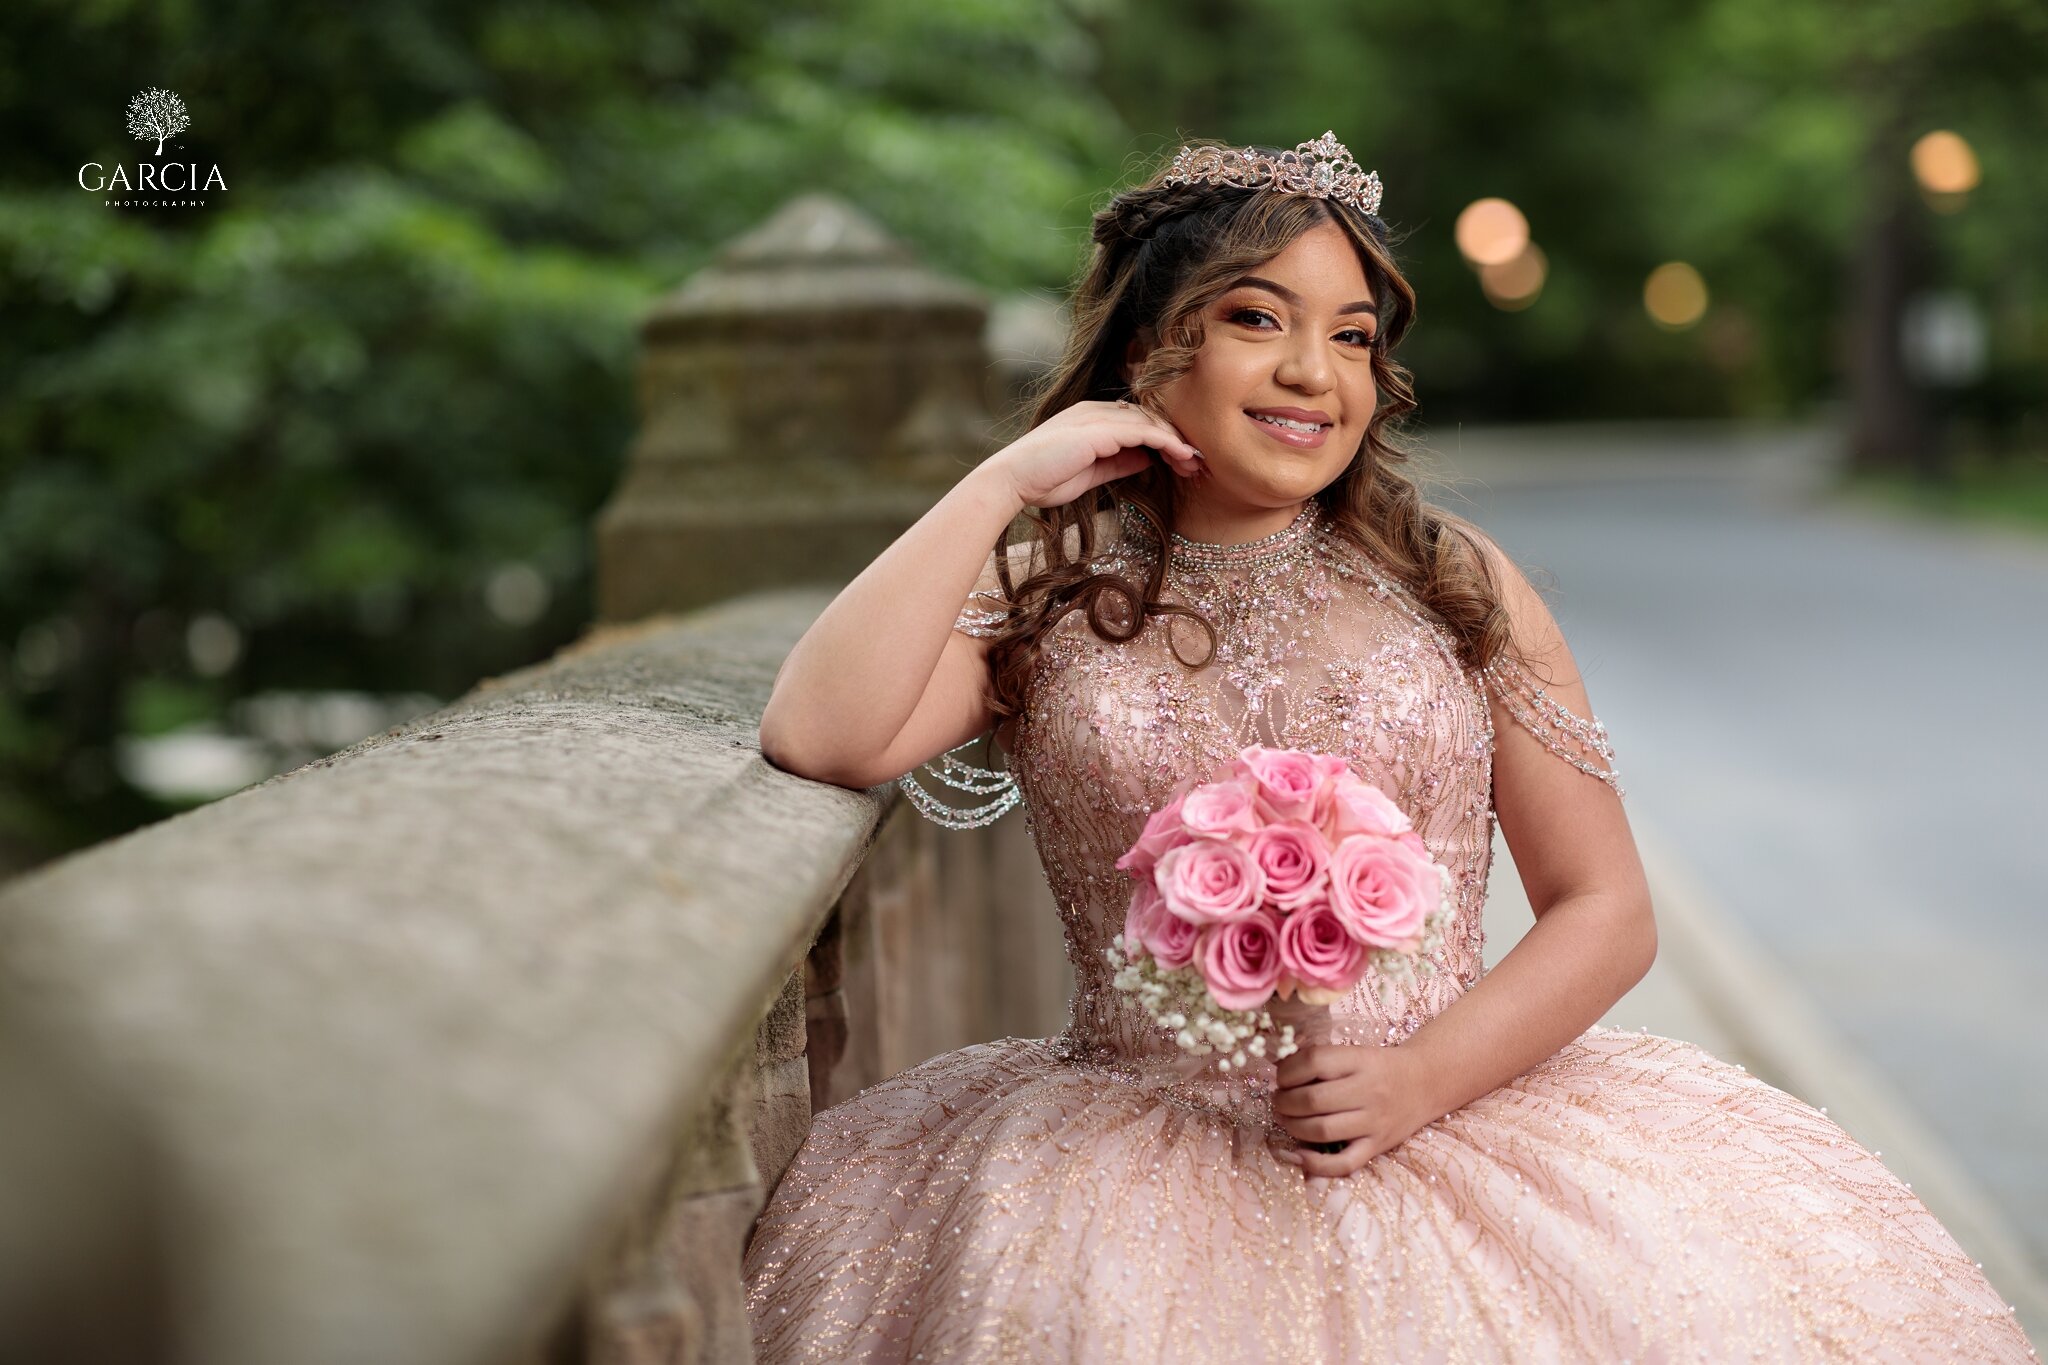 Alana-Quince-Session-Garcia-Photography-9181.jpg